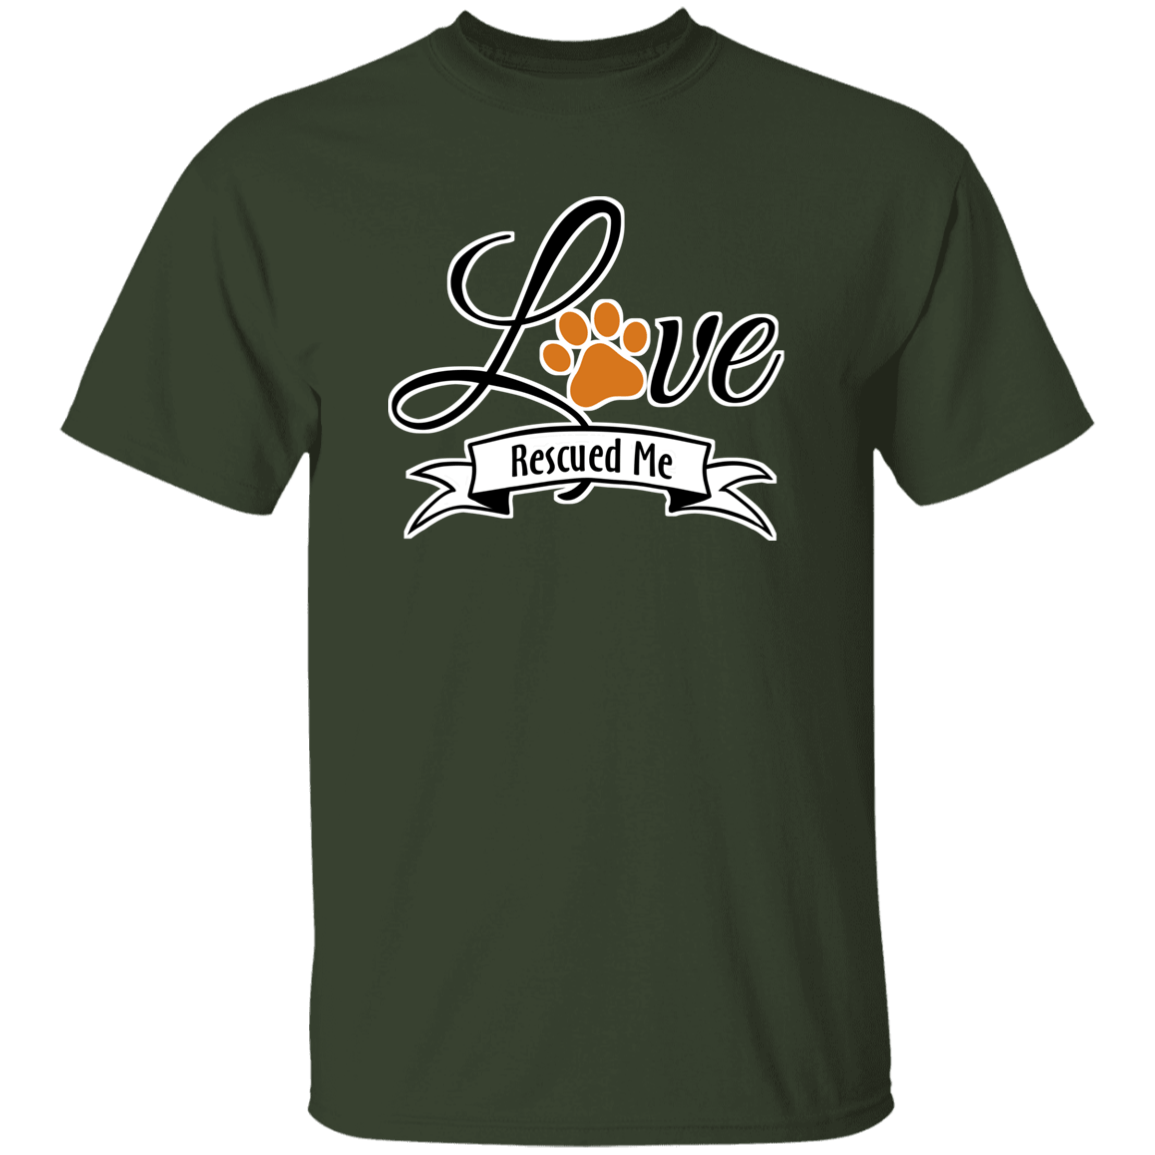 Love Rescued Me - Youth T-Shirt.